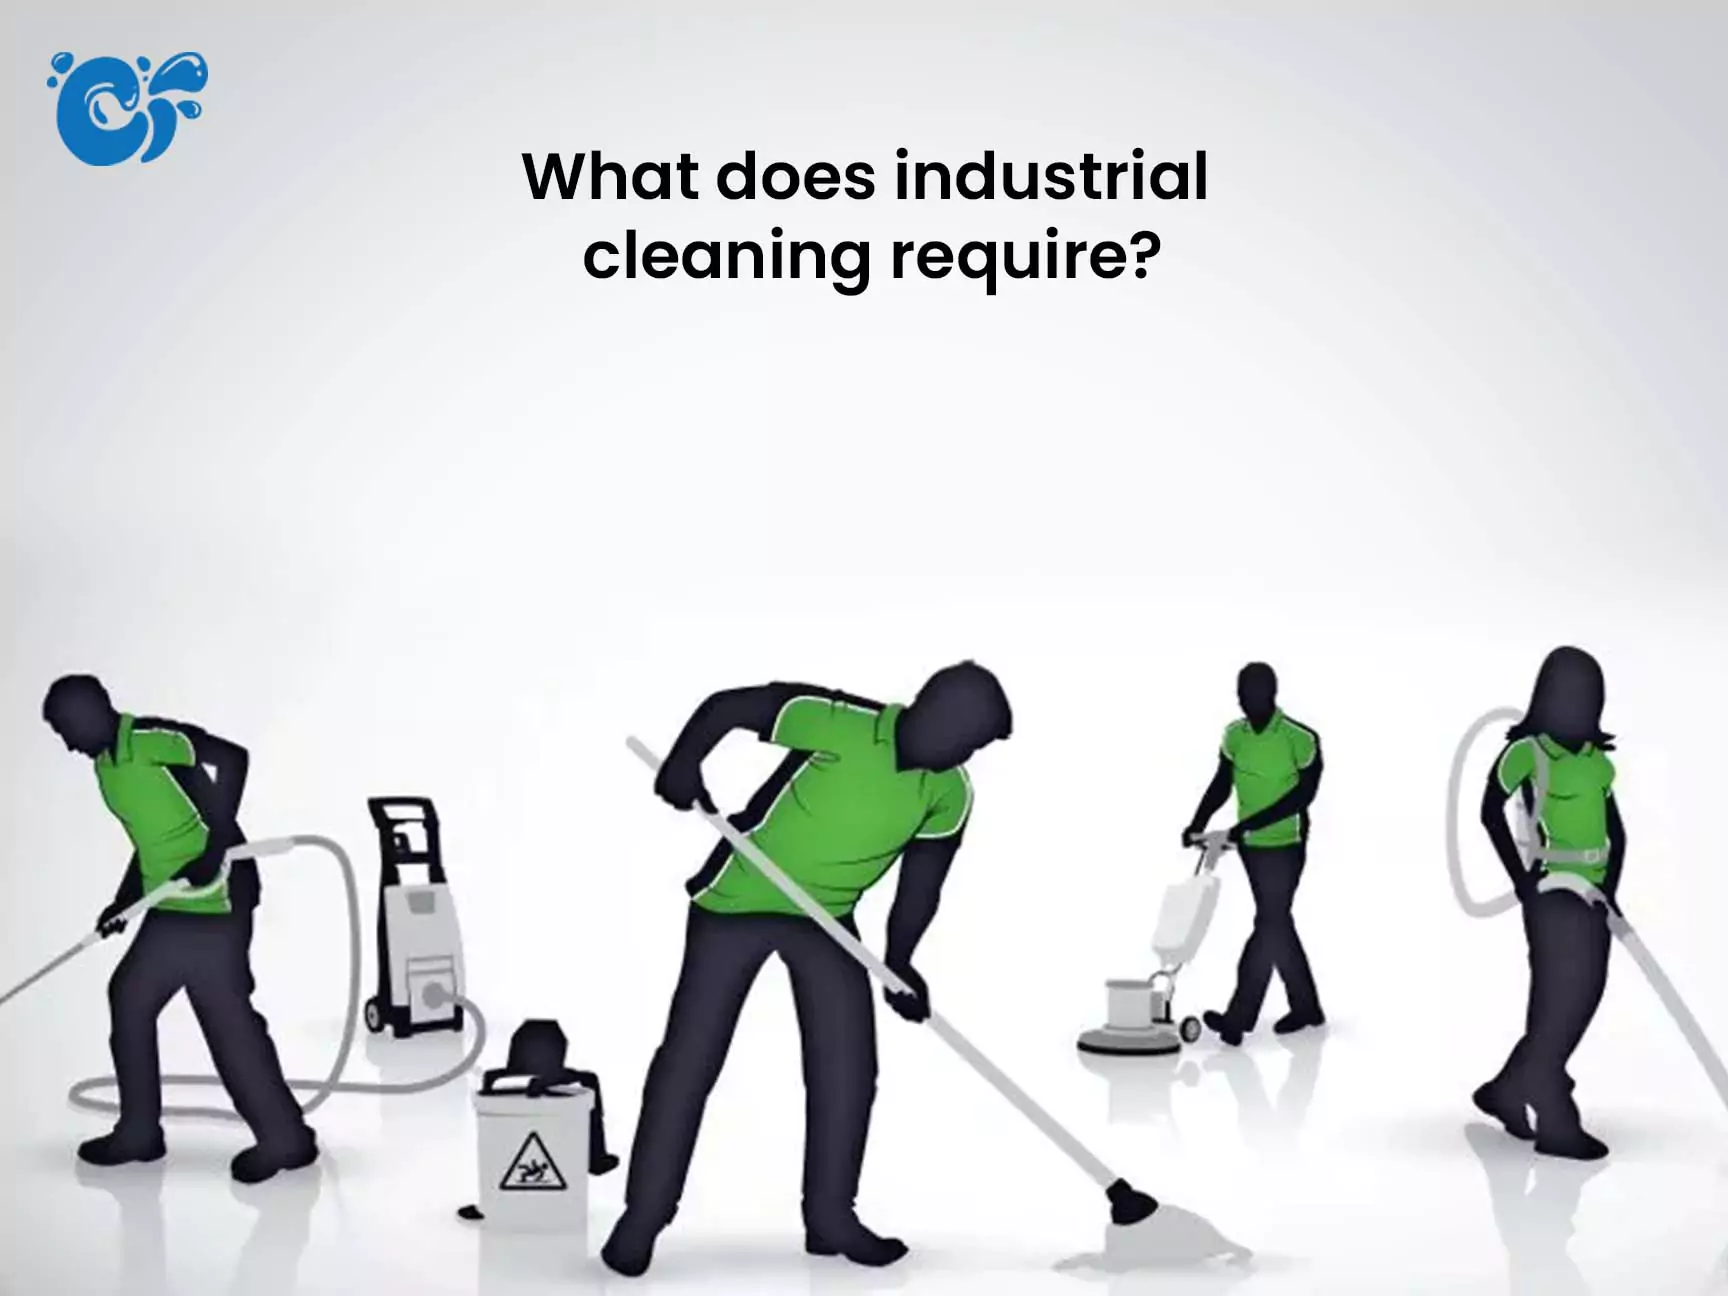 What does industrial cleaning require?